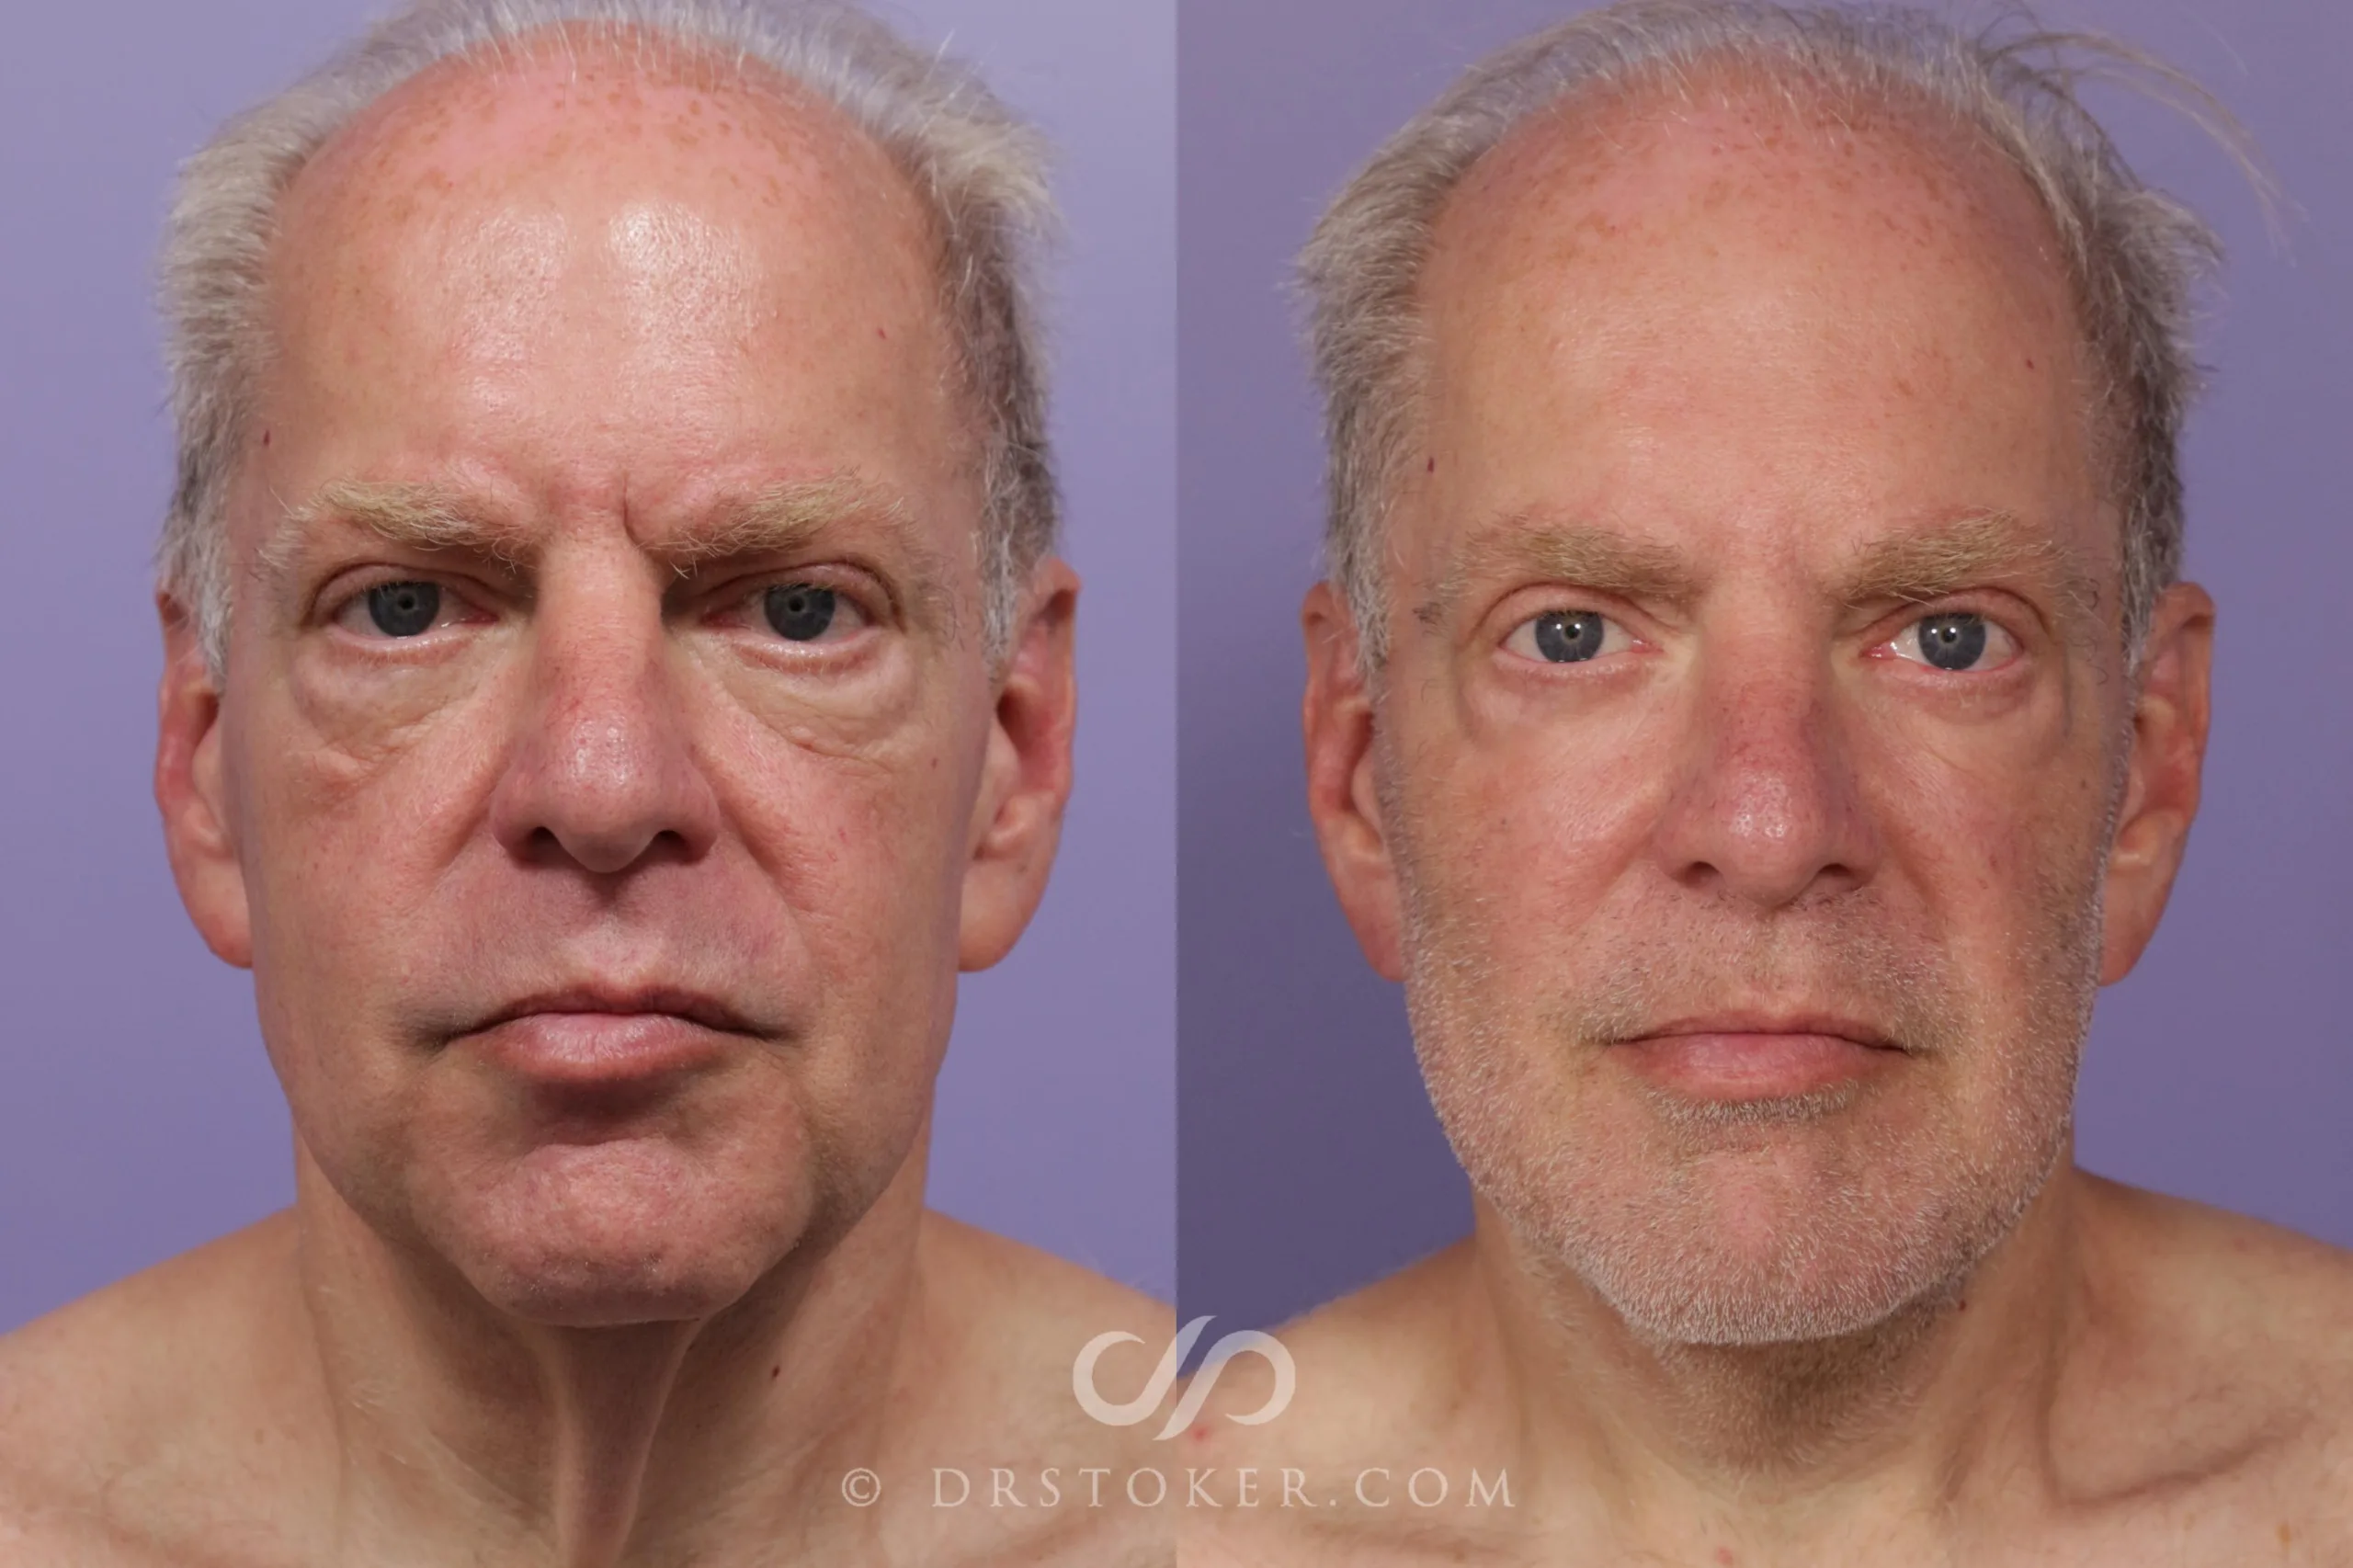 Hyaluronic Acid Before and After: Acid Magic